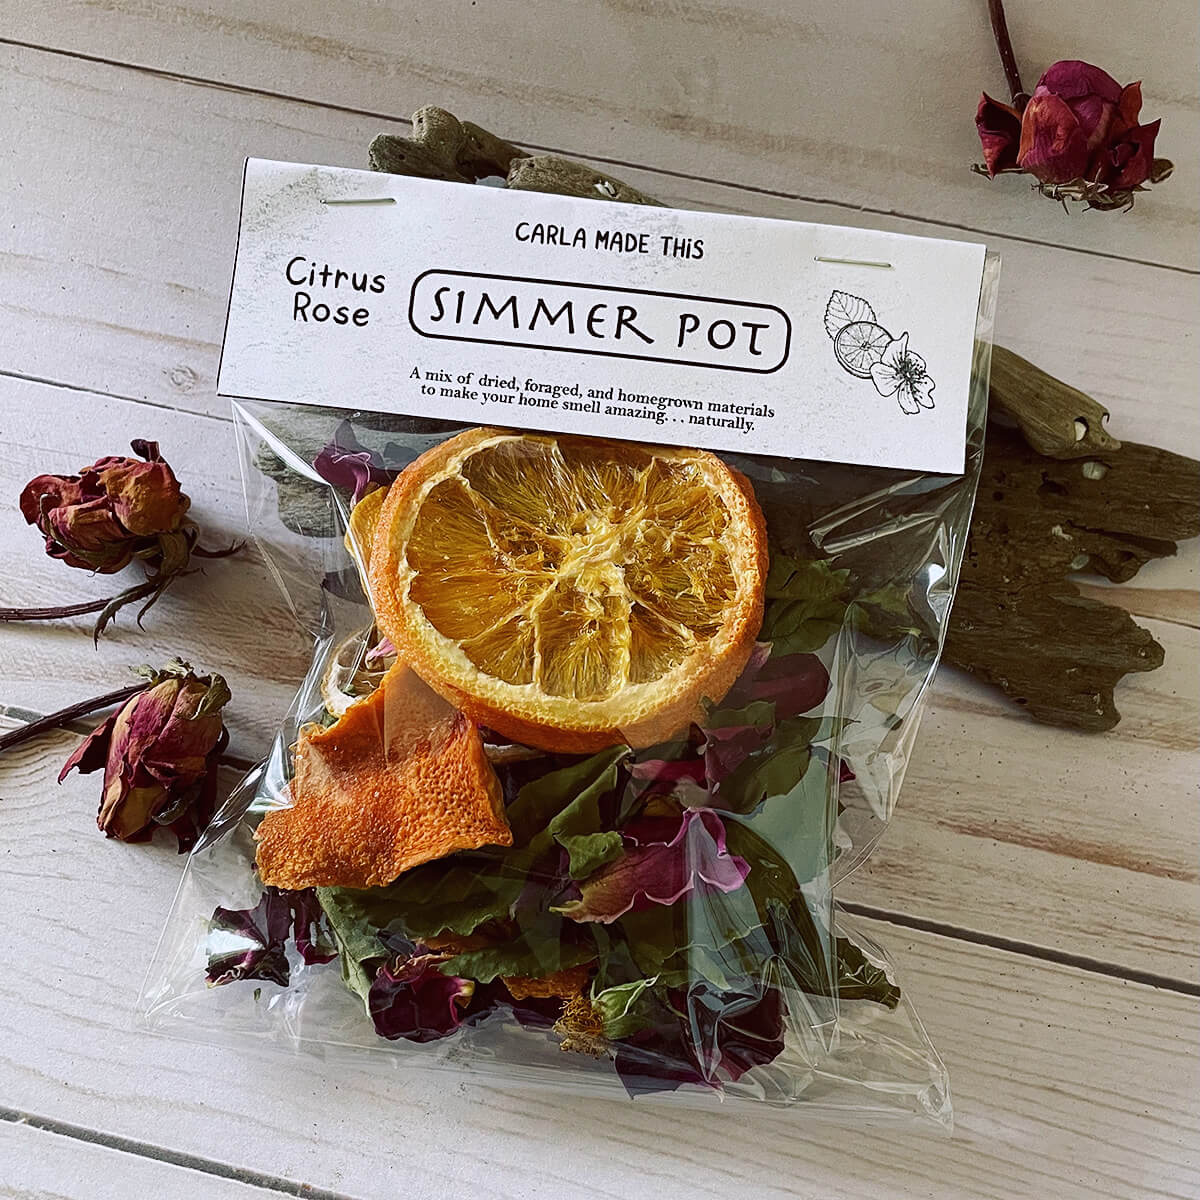 A bag of citrus rose simmer pot on a wooden table with dried roses behind it.